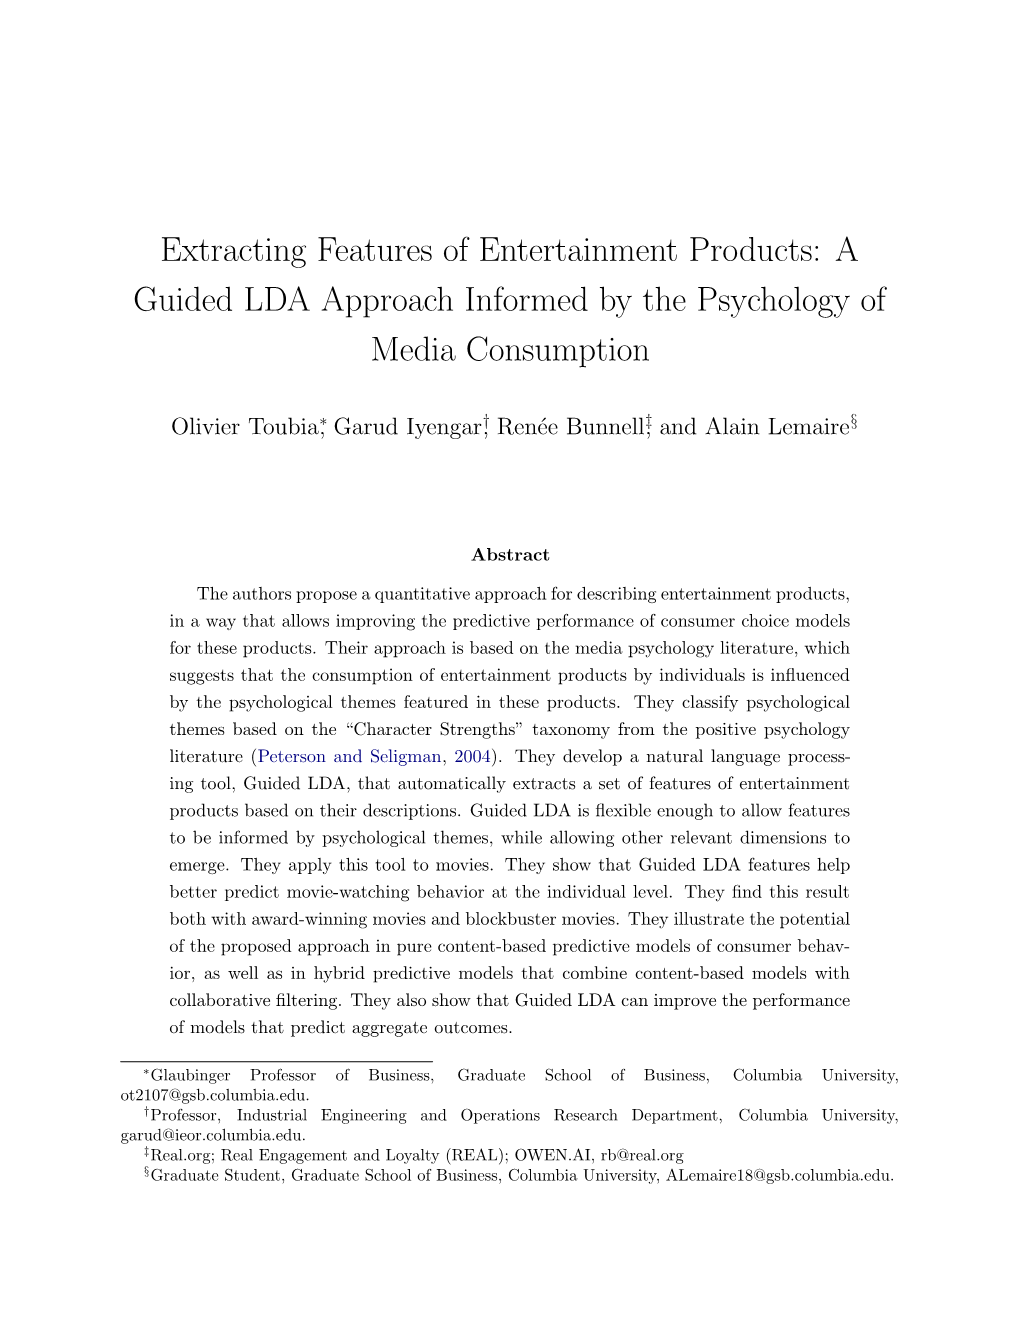 Extracting Features of Entertainment Products: a Guided LDA Approach Informed by the Psychology of Media Consumption